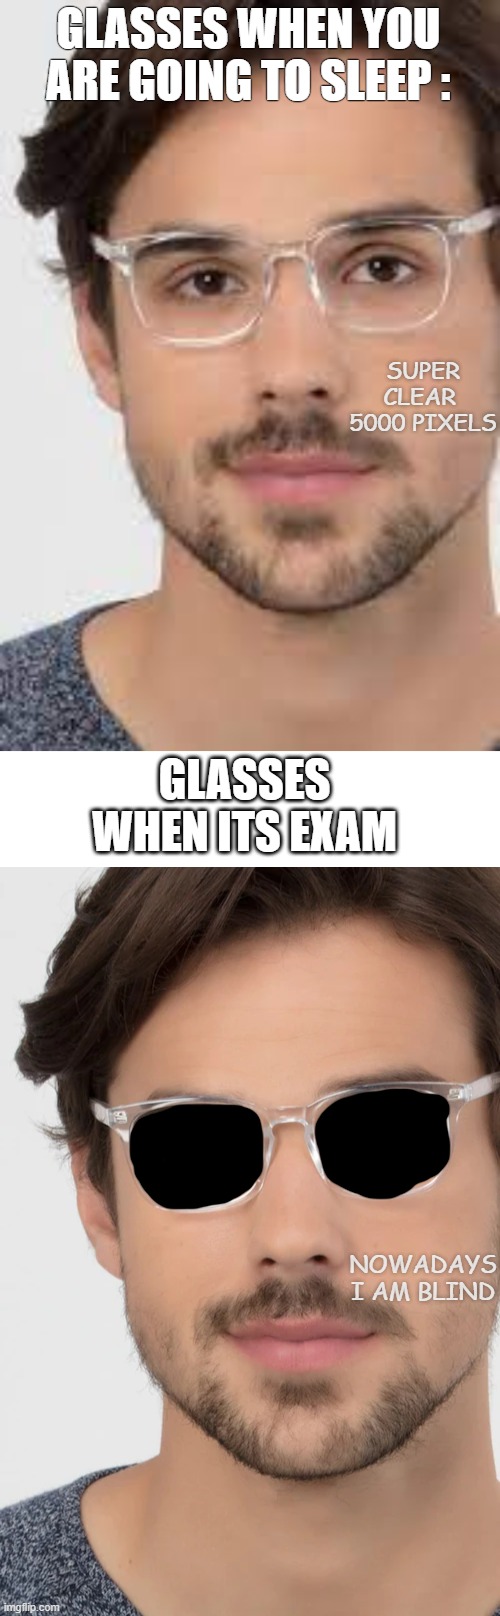 GLASSES OR SPECS | GLASSES WHEN YOU ARE GOING TO SLEEP :; SUPER CLEAR 
5000 PIXELS; GLASSES WHEN ITS EXAM; NOWADAYS I AM BLIND | image tagged in funny,memes,life | made w/ Imgflip meme maker